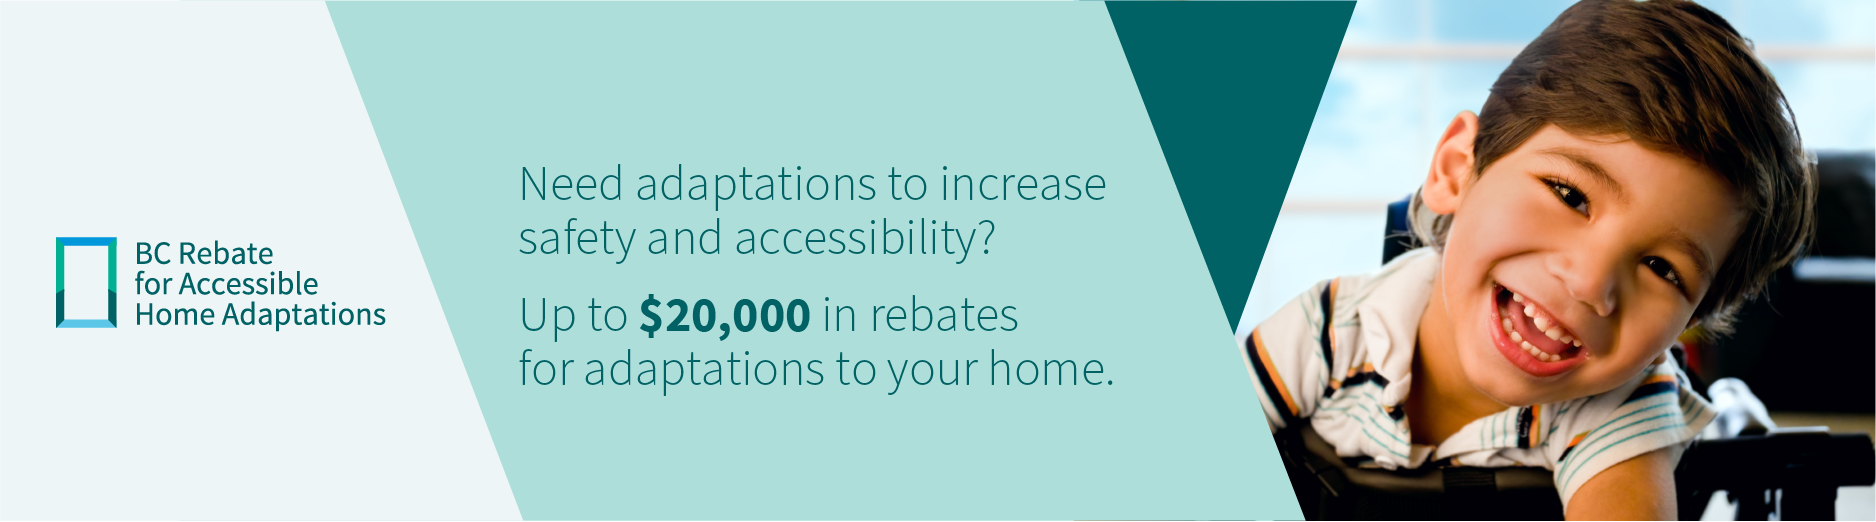 Graphics and photo of young boy in wheelchair beside text that reads "Need adaptations to increase safety and accessibility? Up to $20,000 in rebates for adaptations to your home" 